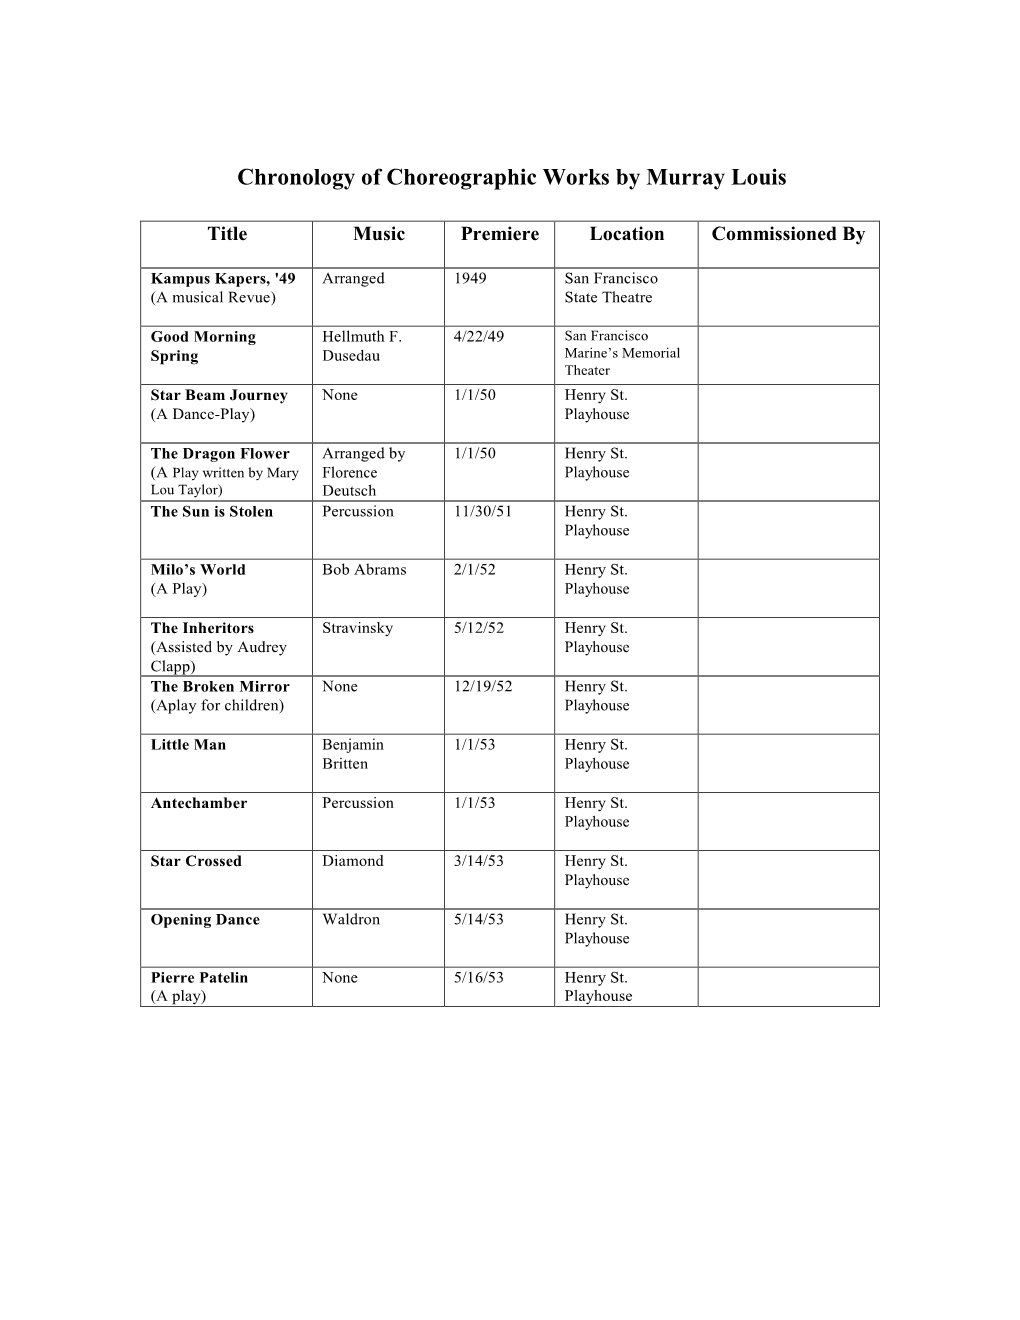 Chronology of Choreographic Works by Murray Louis